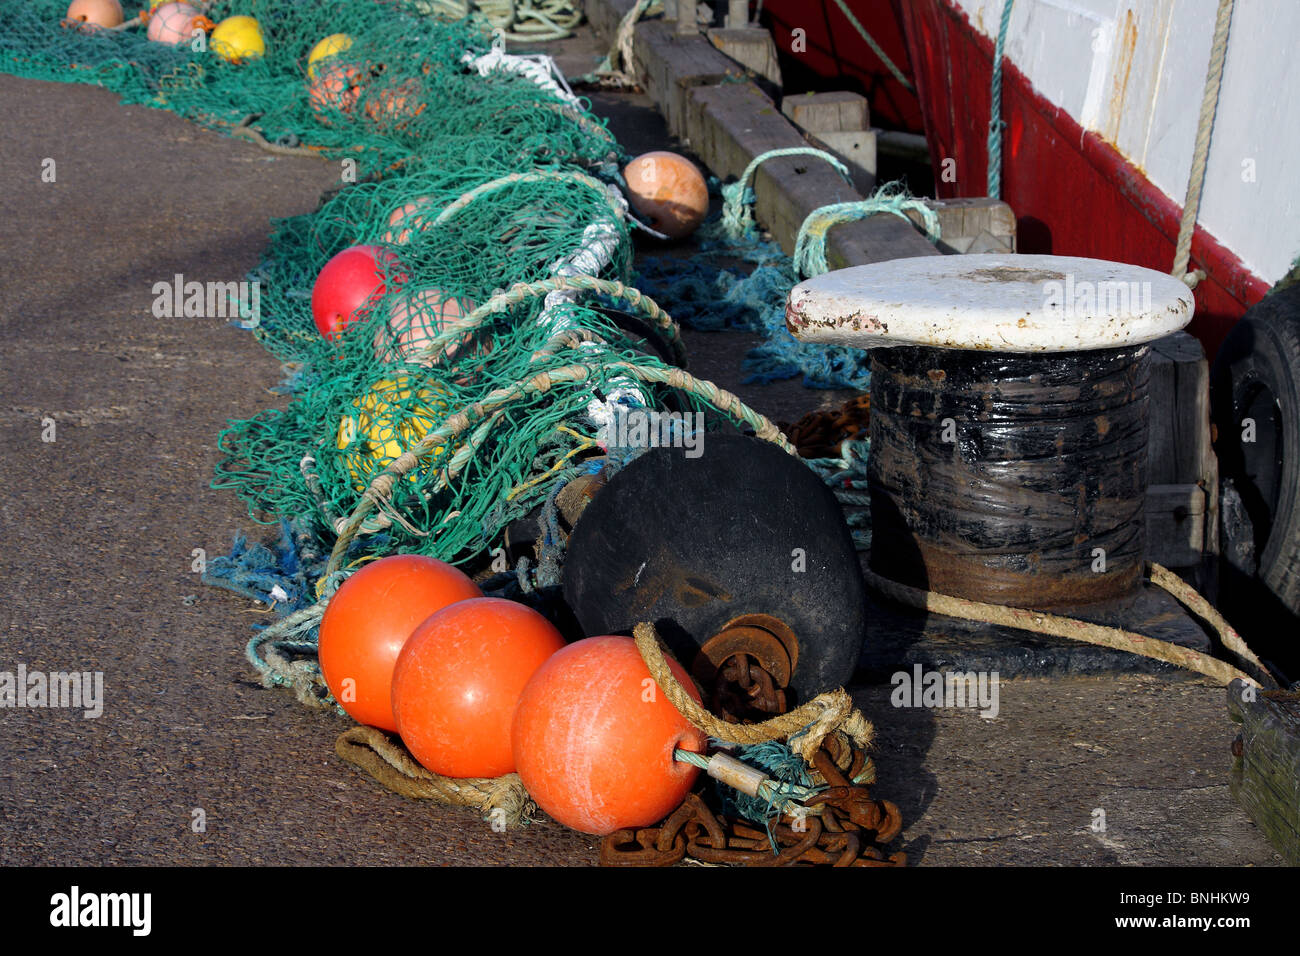 A sea fishing net cast aside on the pathway beside the fishing boat Stock Photo